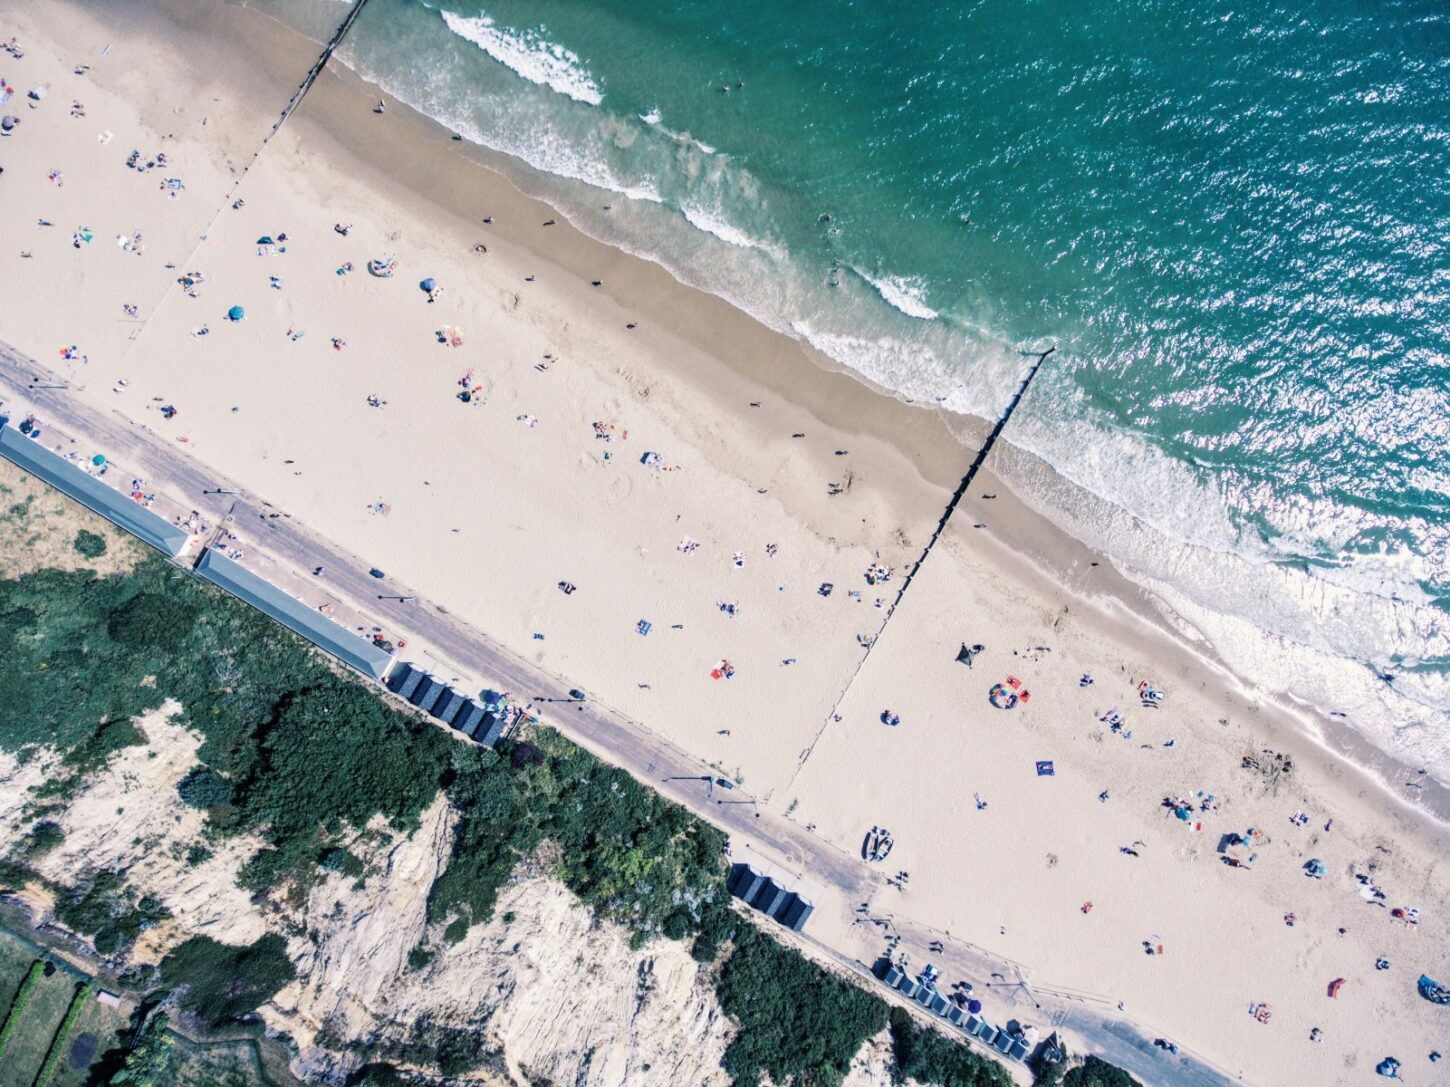 The beach seen from above